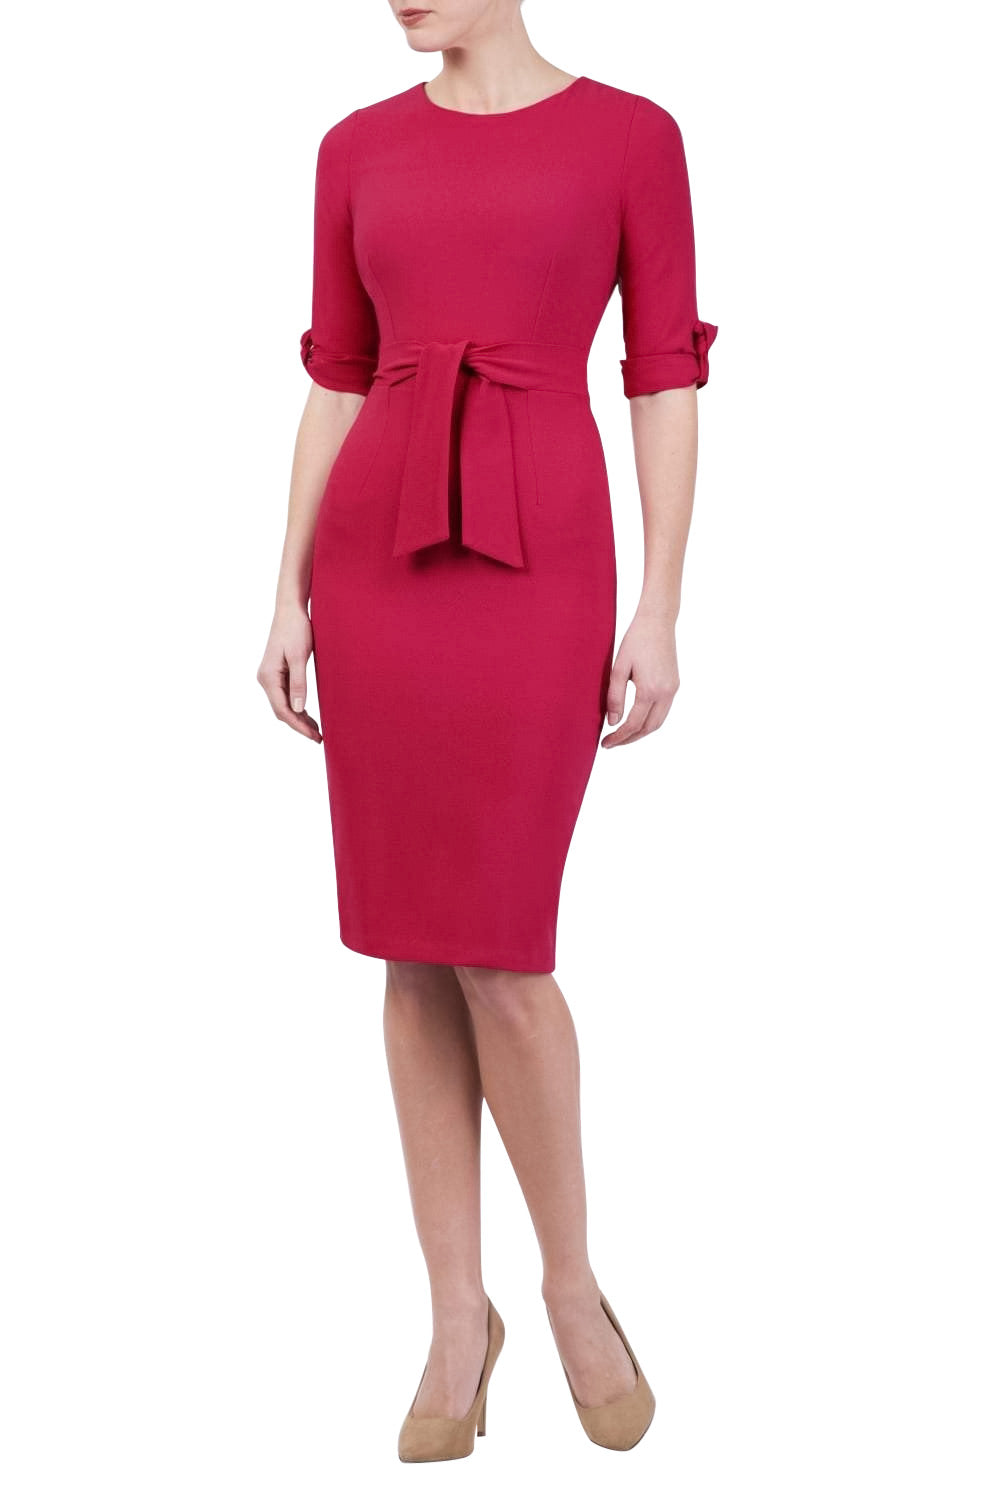 Model wearing the Diva Tryst dress in pencil dress design in ruby red front image